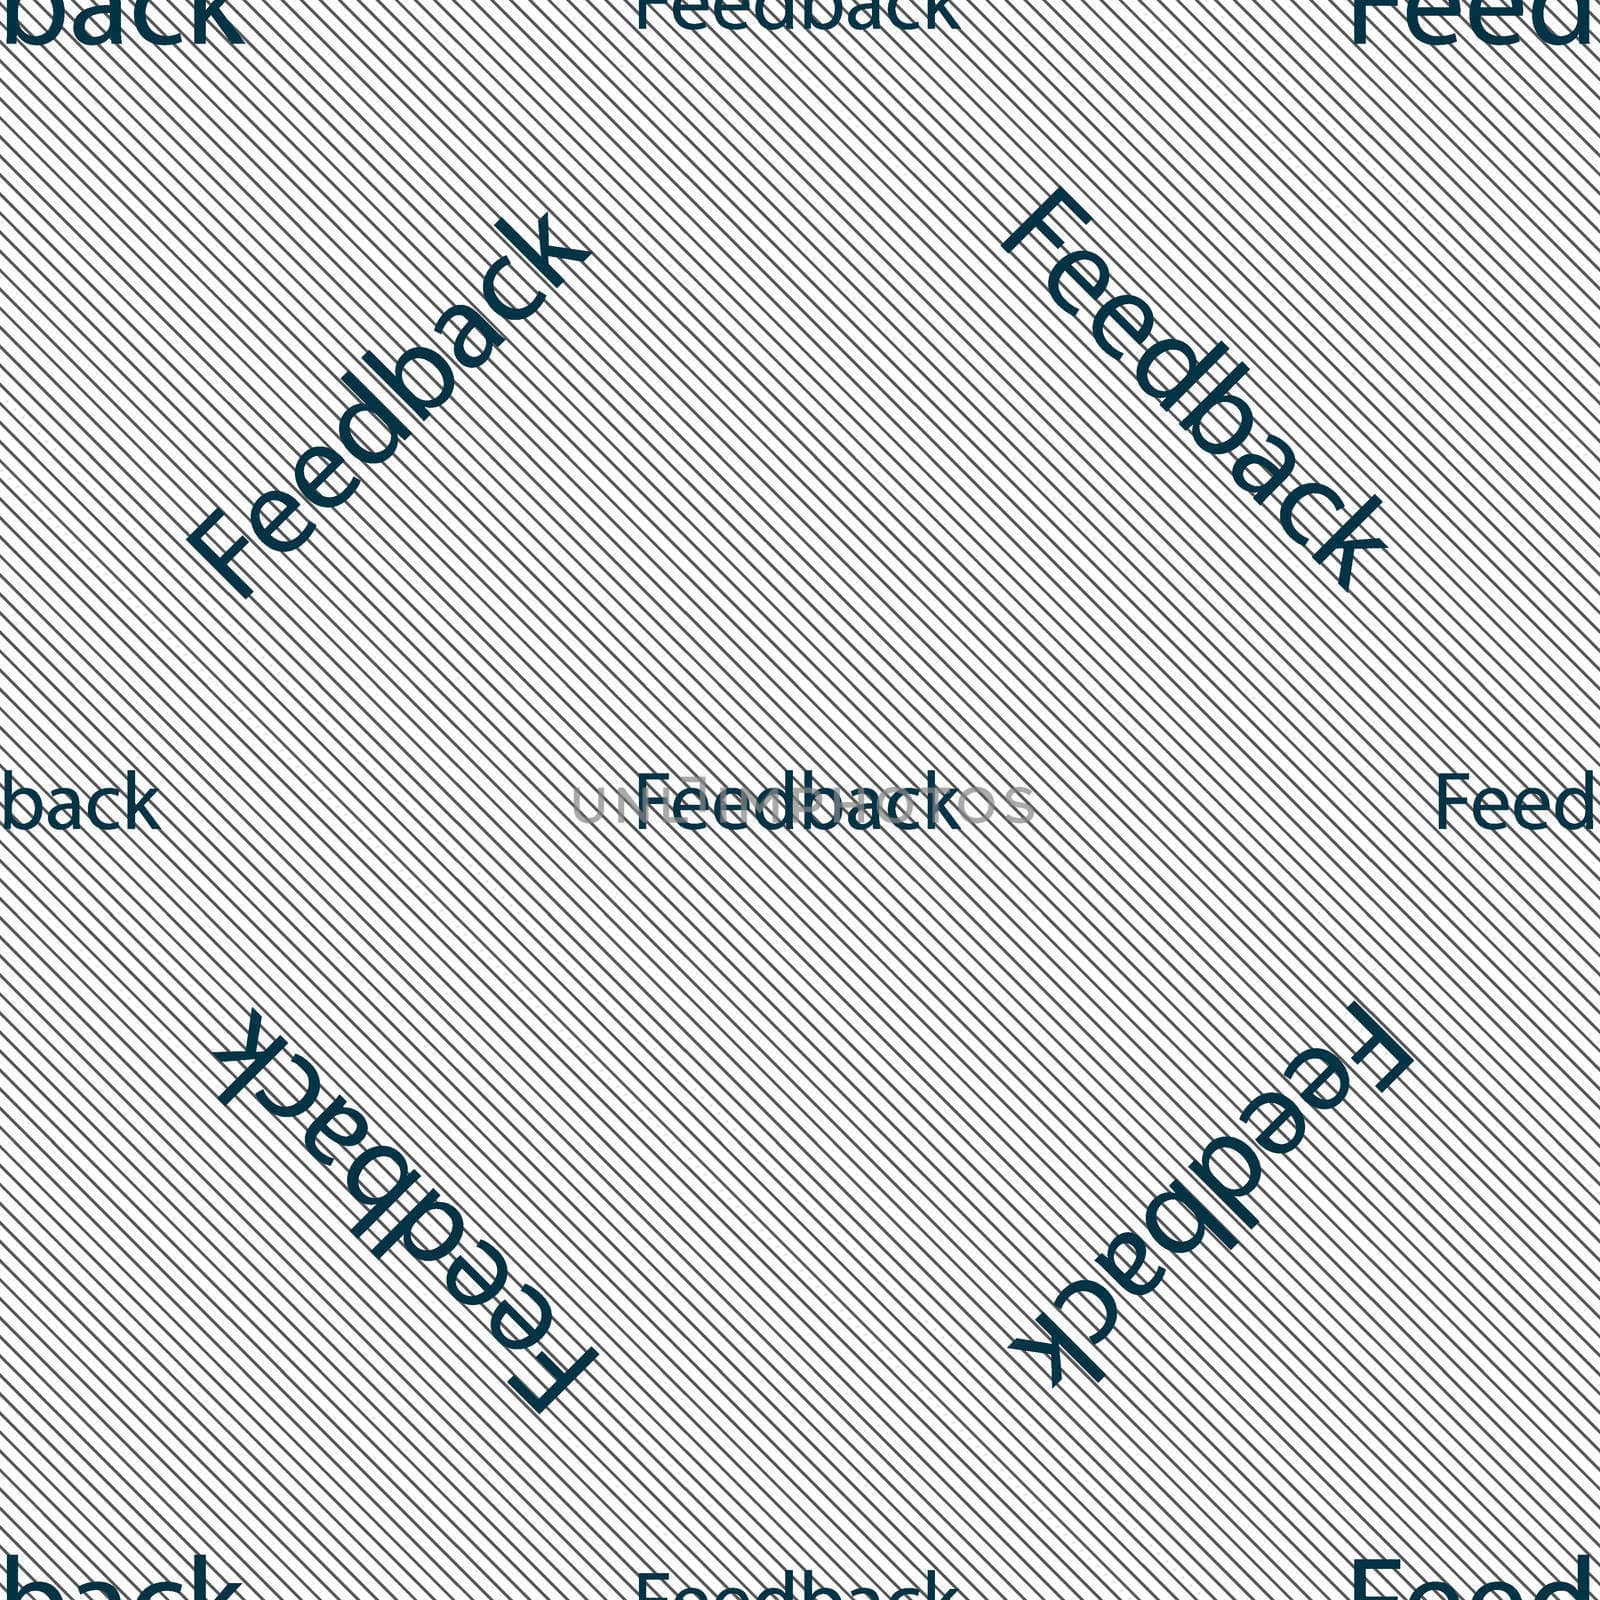 Feedback sign icon. Seamless pattern with geometric texture. illustration